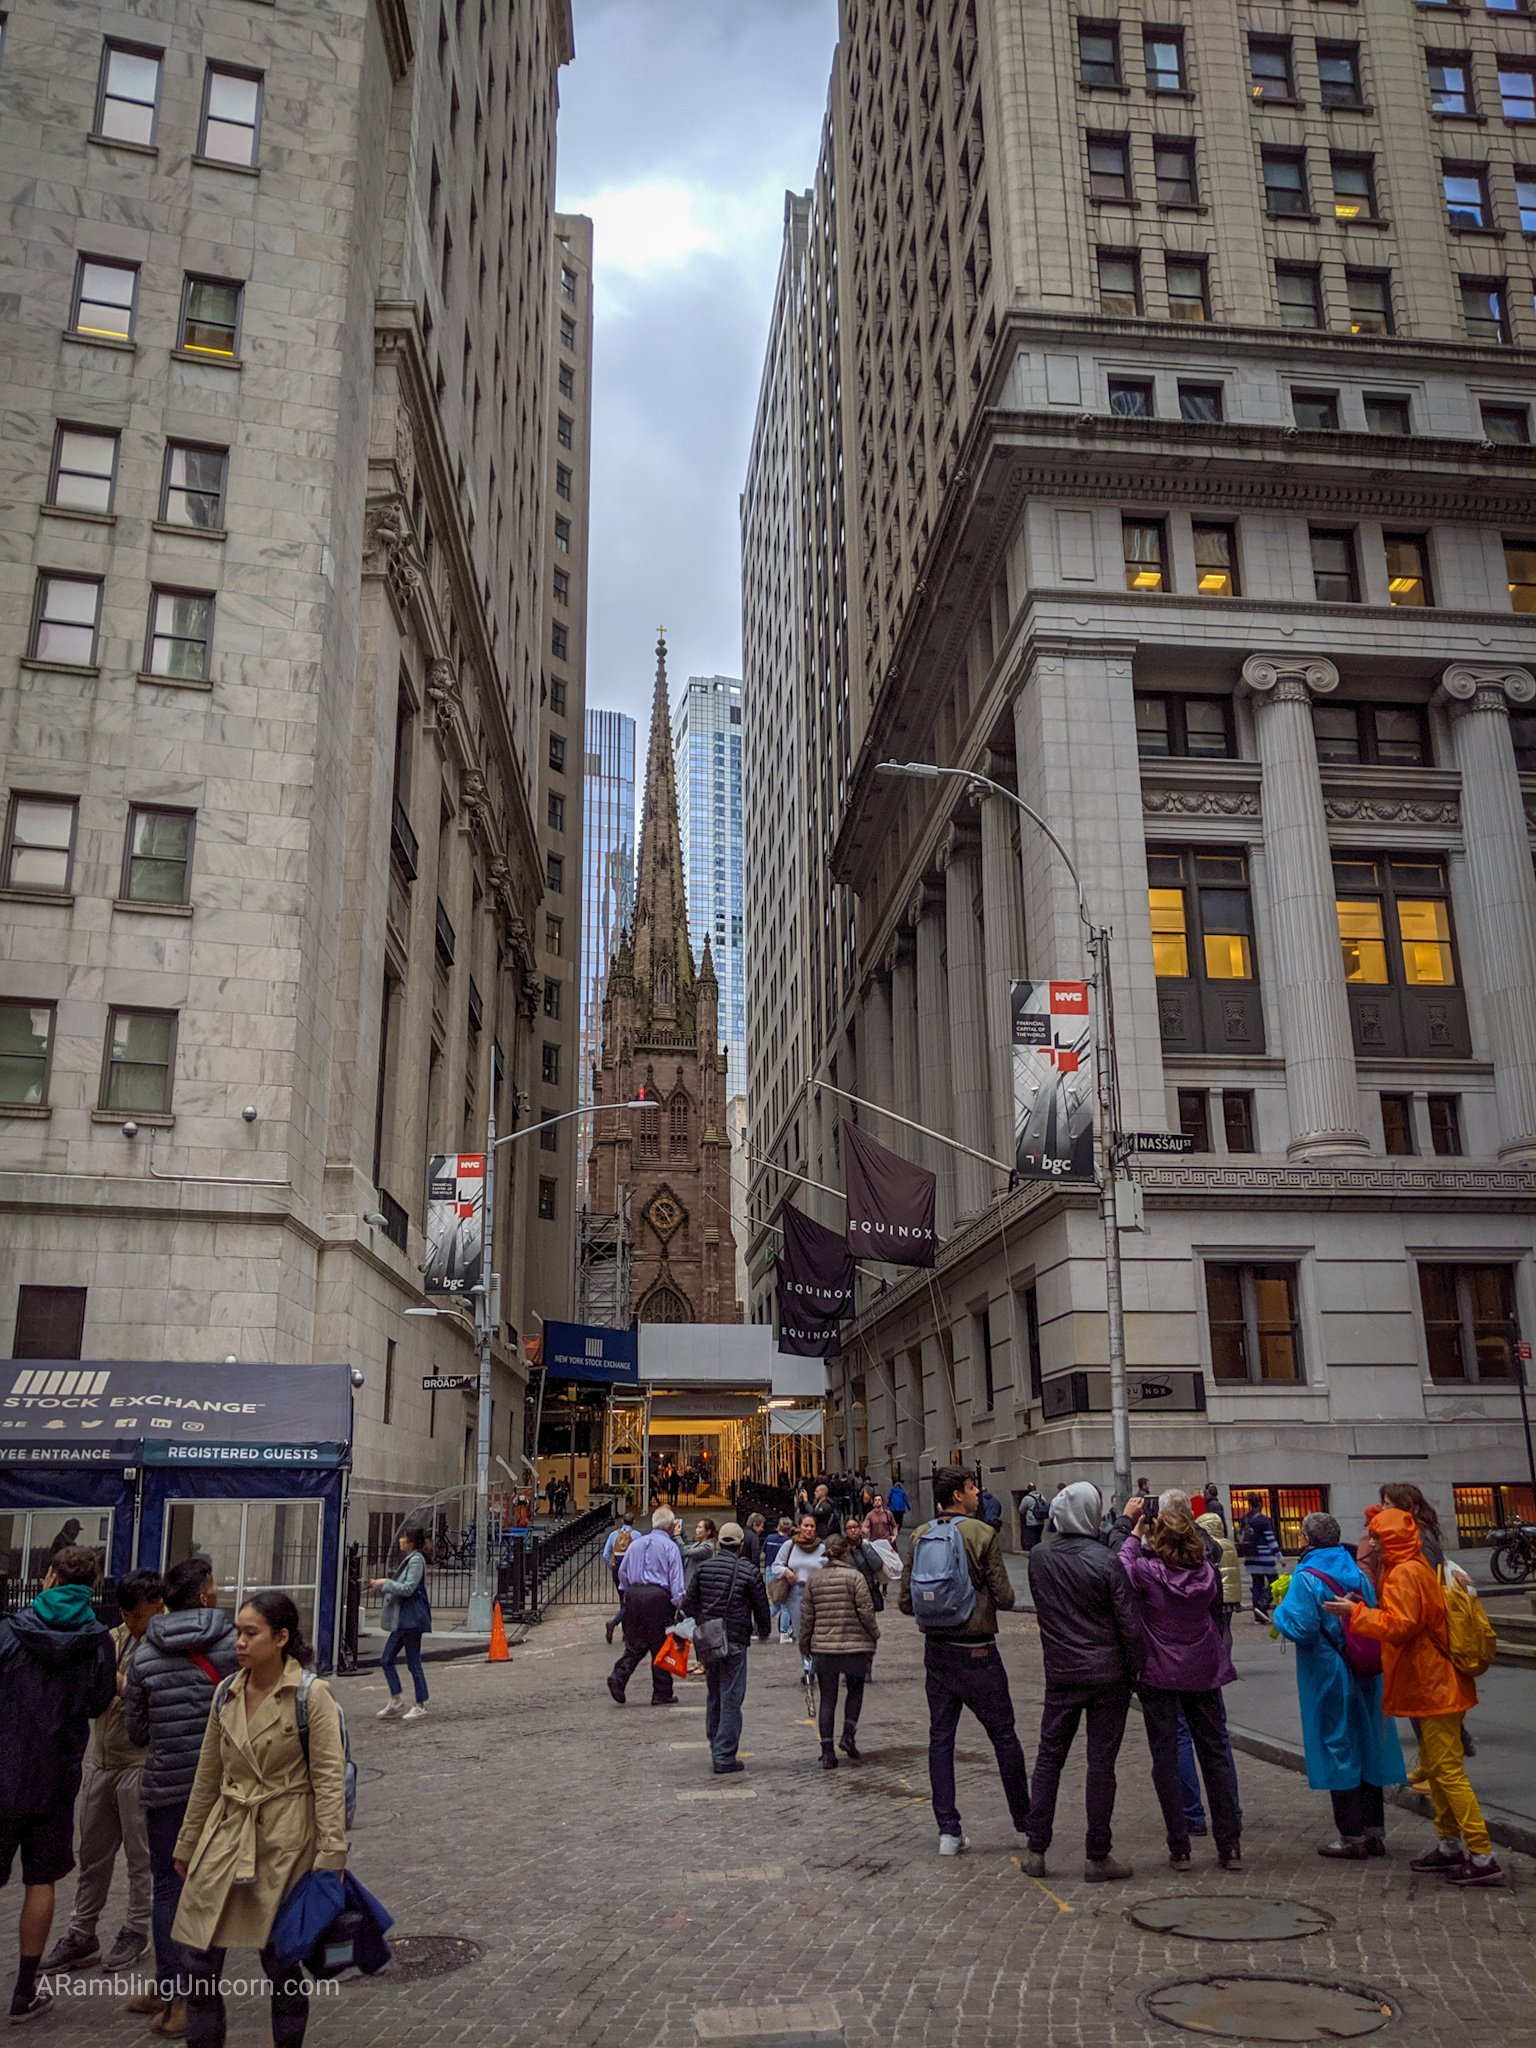 A Tour of Lower Manhattan in New York City